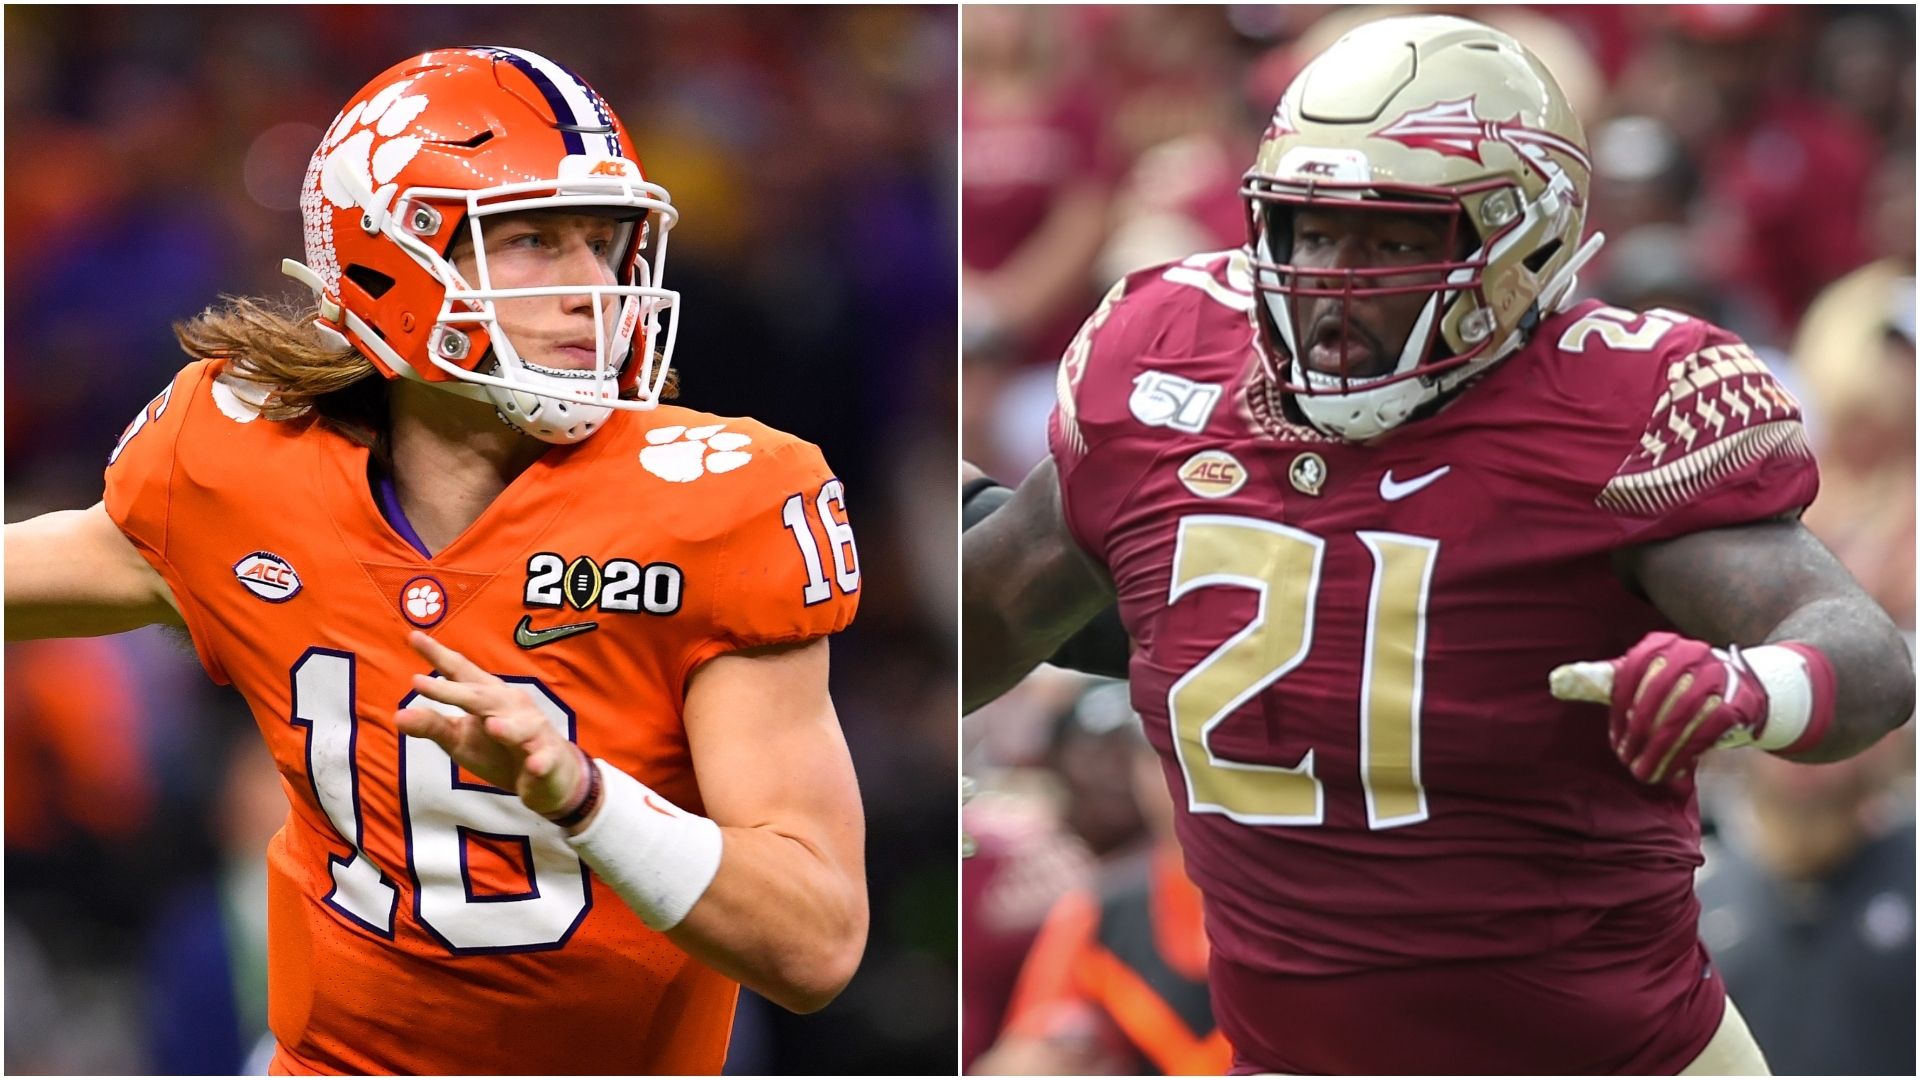 The top players going into the 2020 college football season ESPN Video